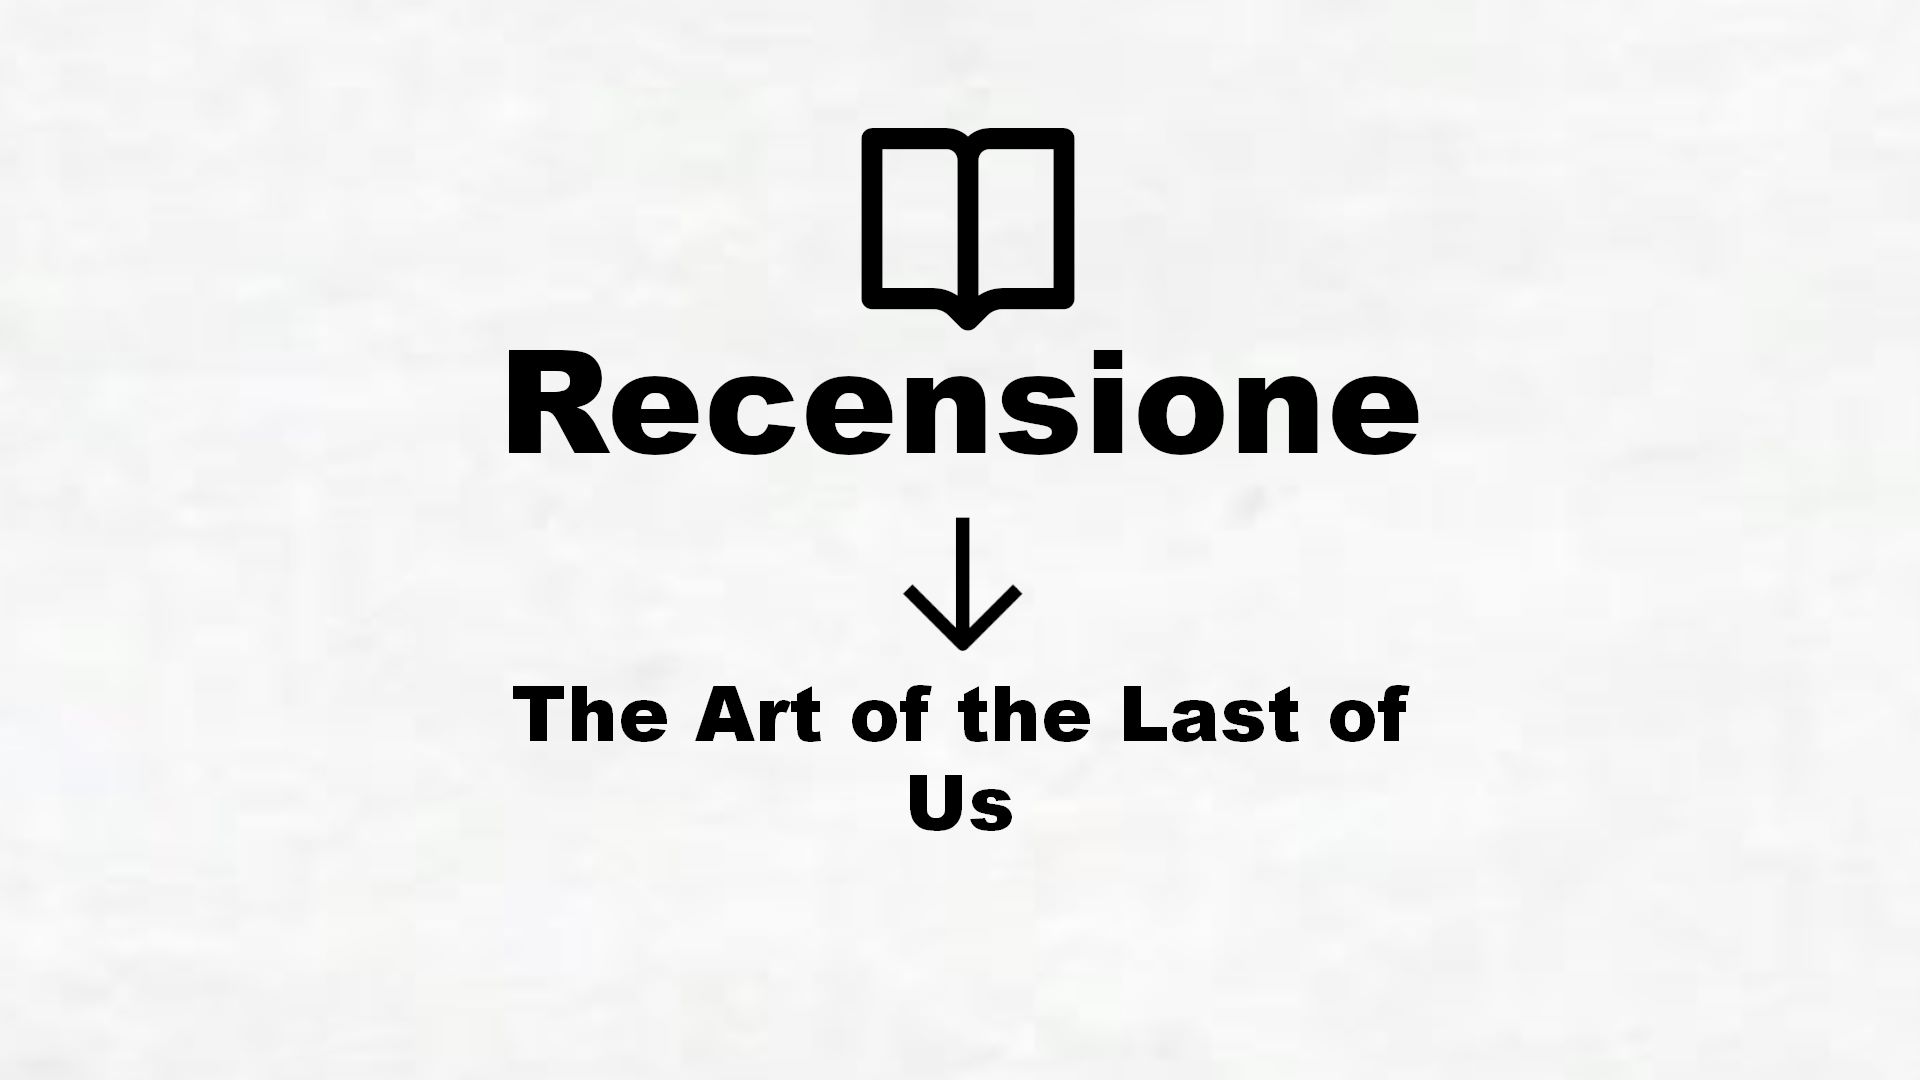 The Art of the Last of Us – Recensione Libro